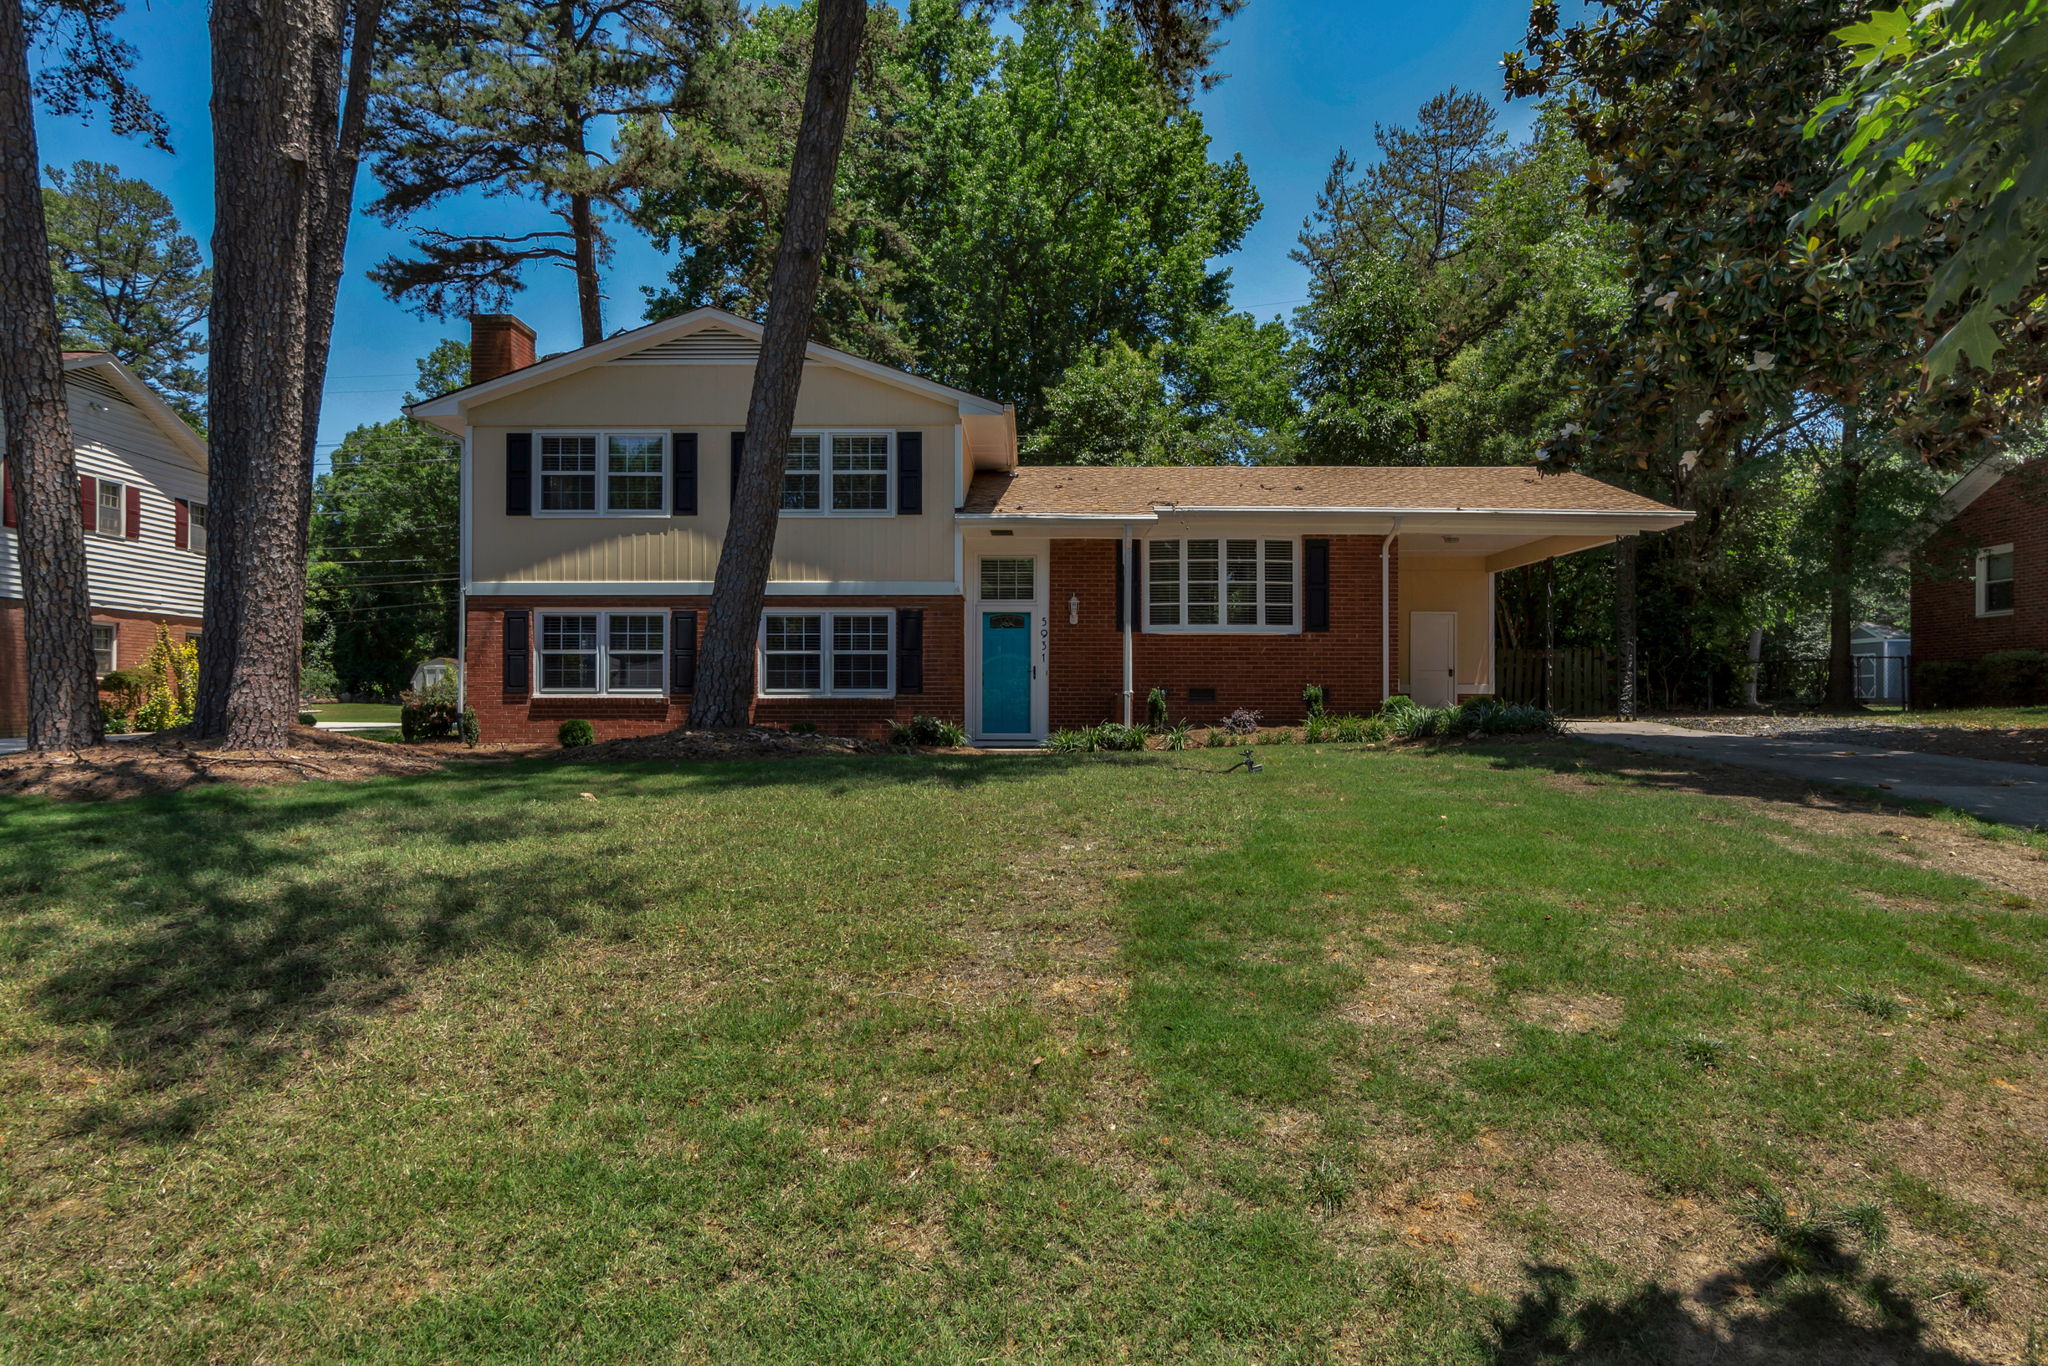  5931 Charing Place, Charlotte, NC 28211, US